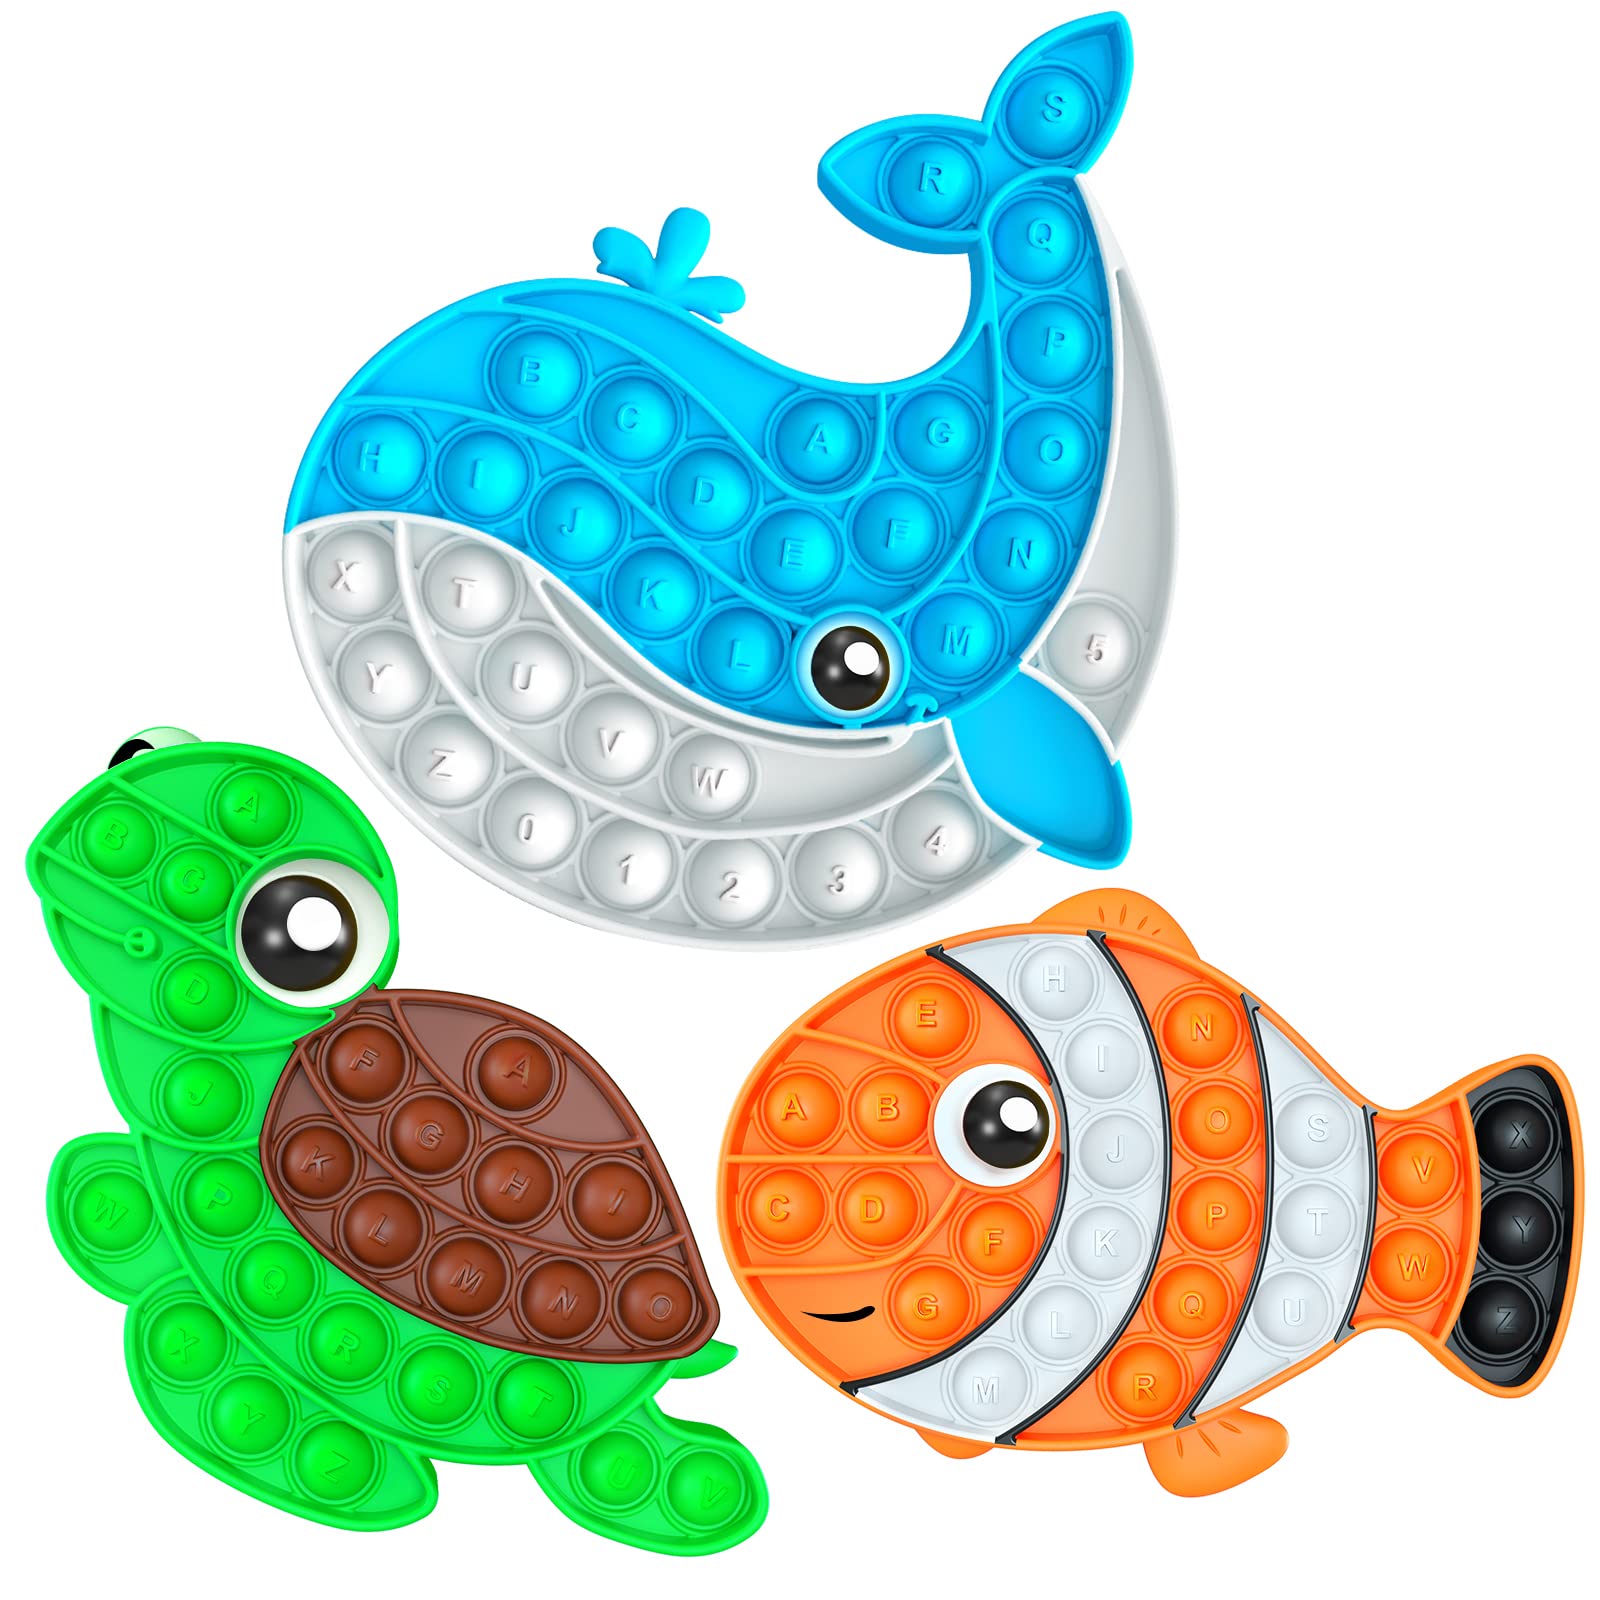 3 Pack Push Bubble Fidget Sensory Toys, Sensory Fidget Poppers Push Bubble Toy, Silicone Squeeze Autism Anxiety Stress Relief Educational Popping Toys for Kids Adults - Clown Fish, Whale, Turtle